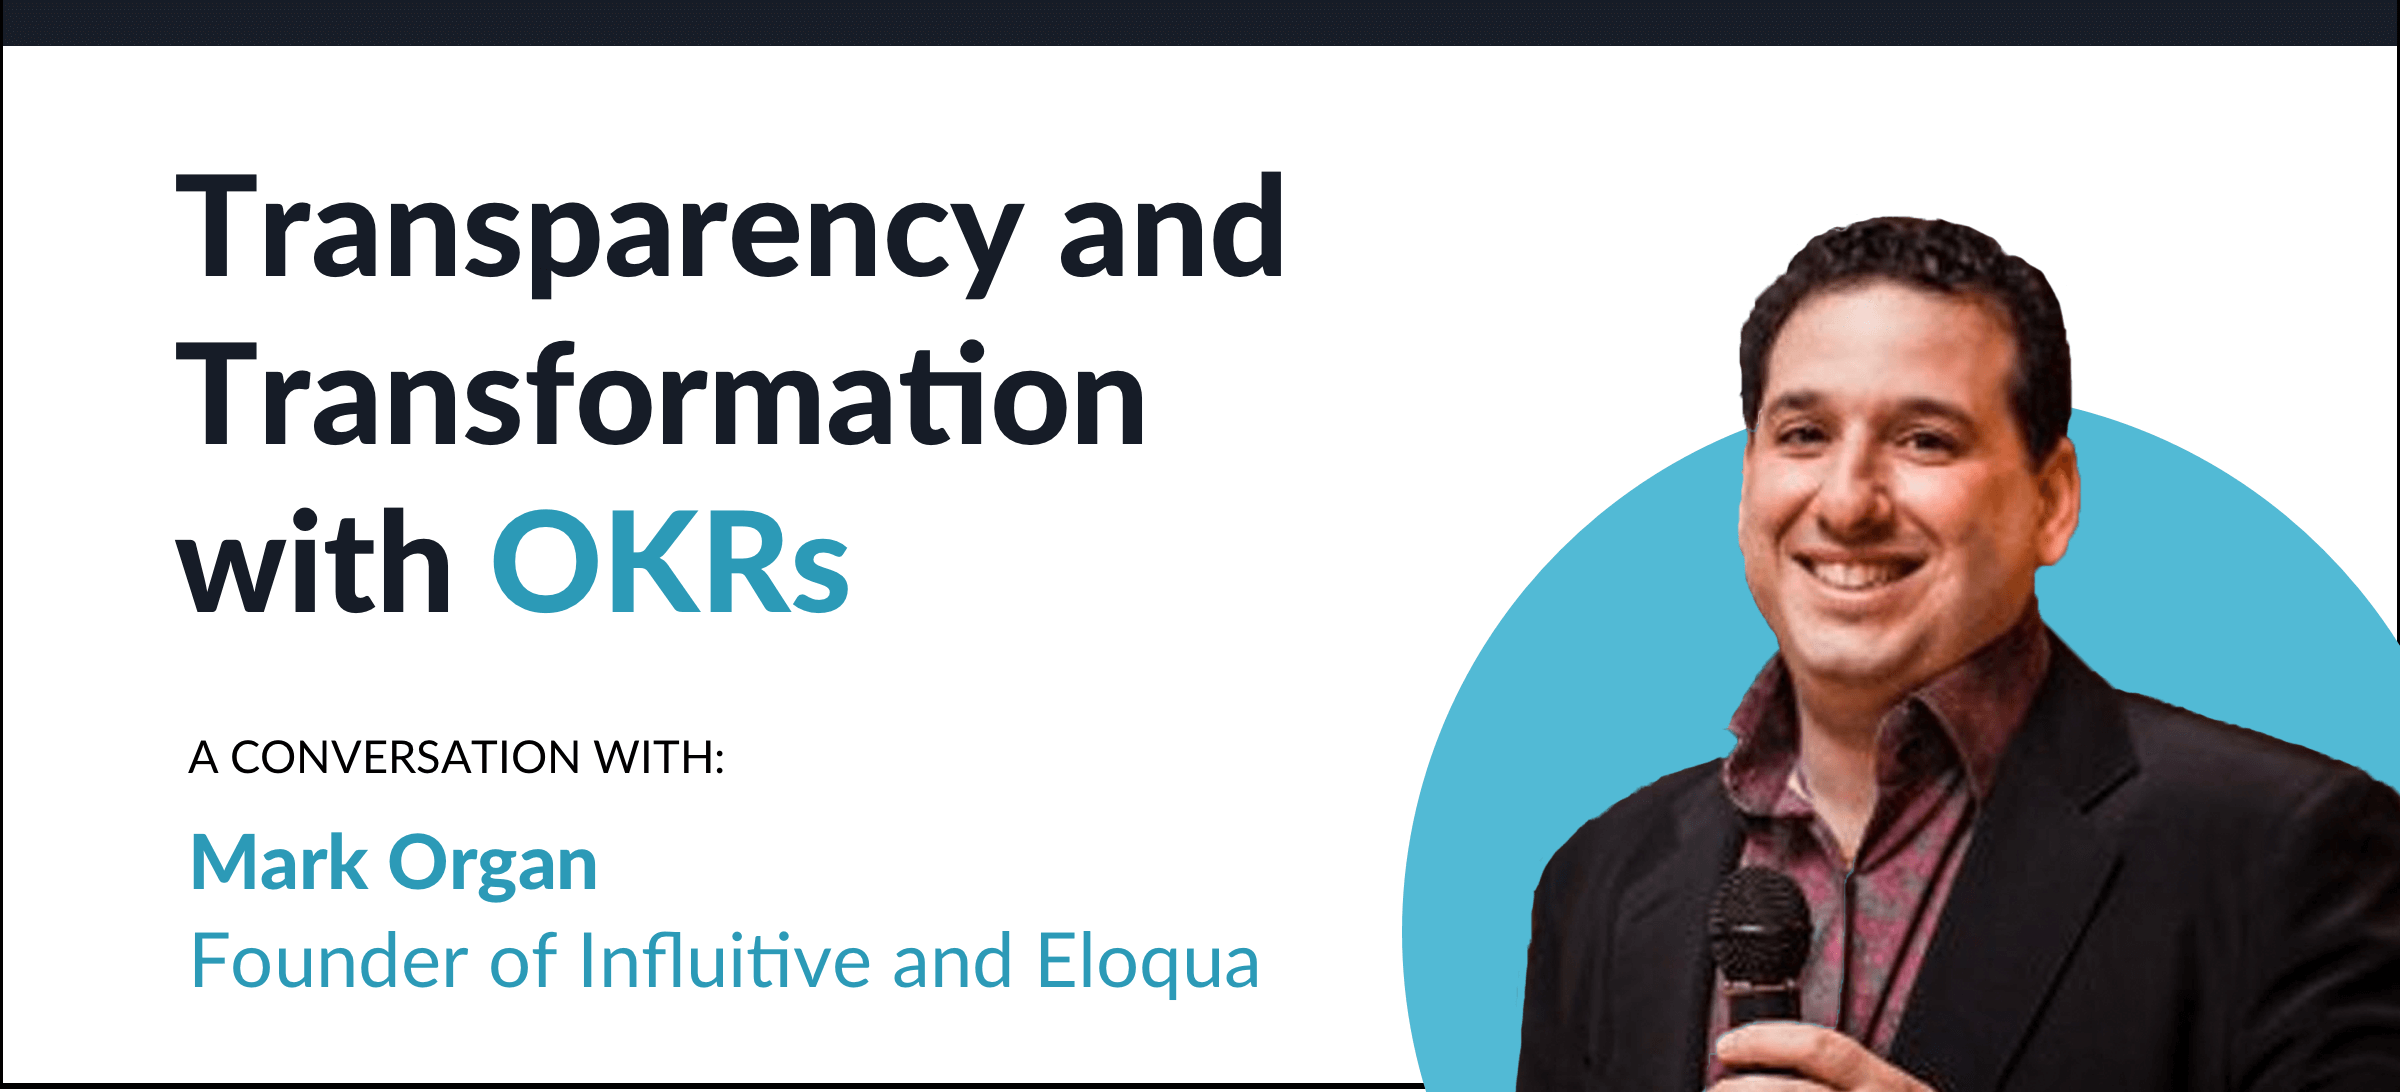 Transparency and Transformation with OKRs: A conversation with Mark Organ, founder of Eloqua and Influitive